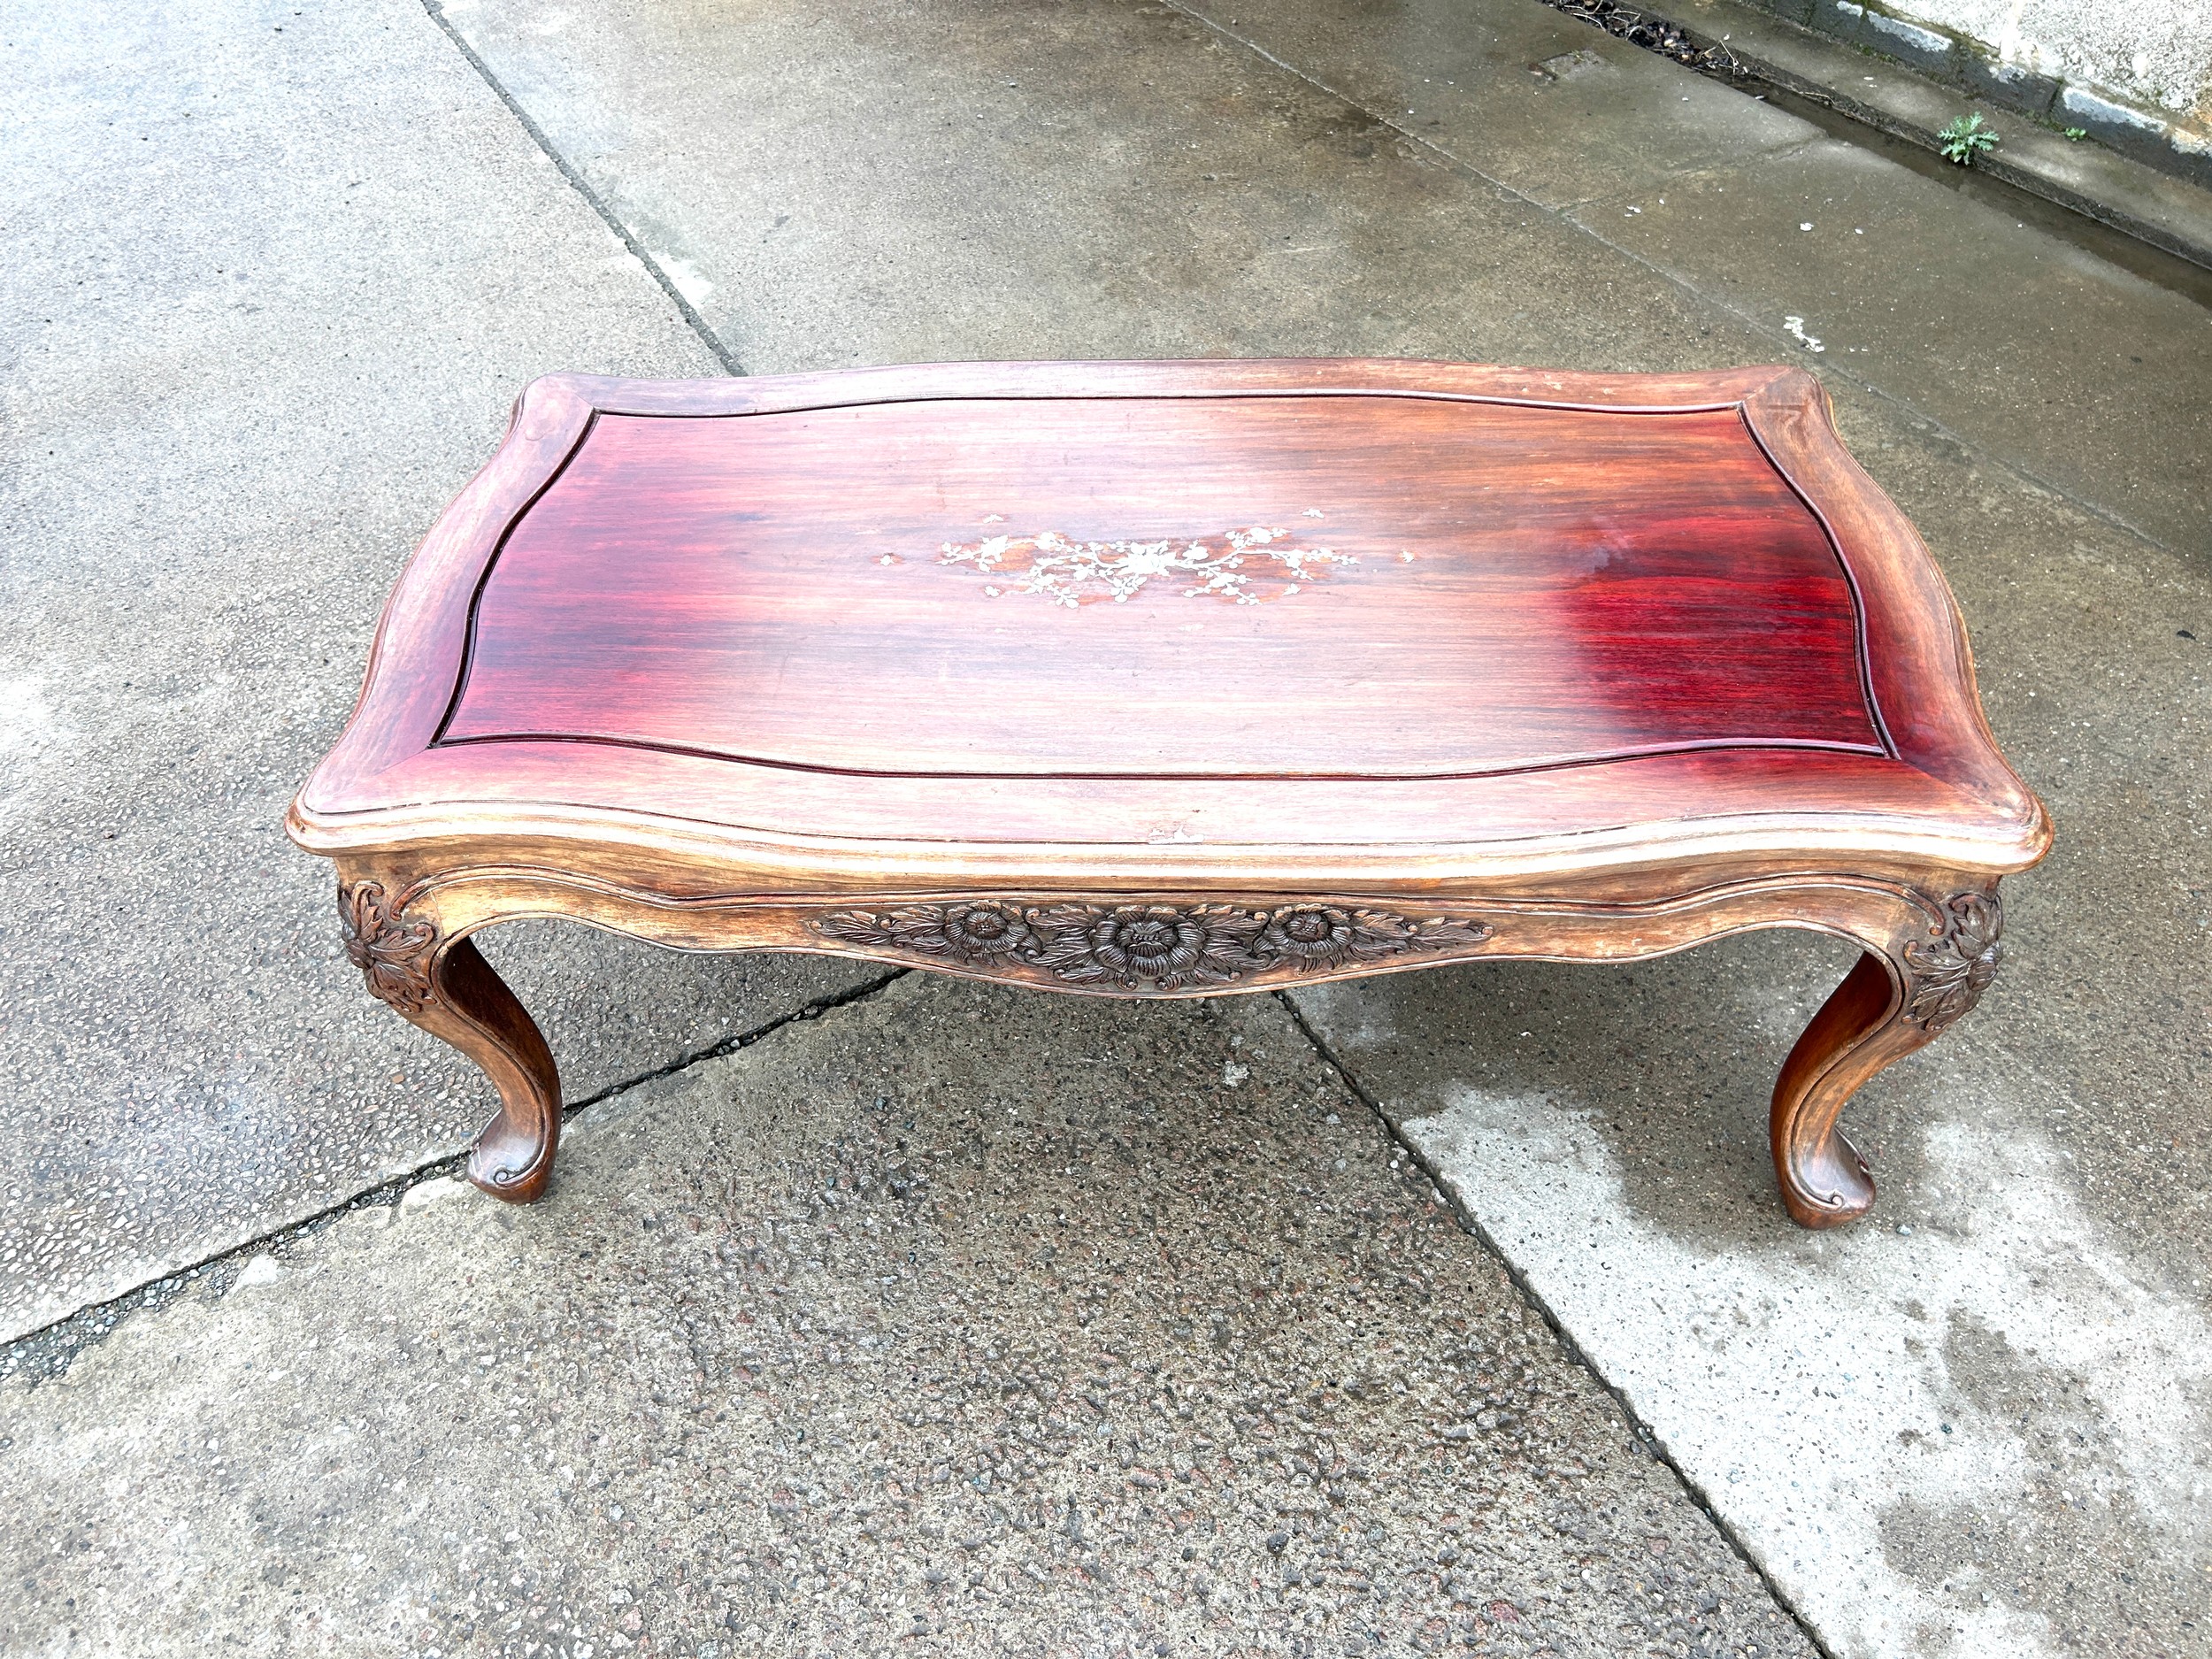 Mahogany inlaid coffee table with carved sides measures approx 21 inches tall, 48 wide and 27 deep